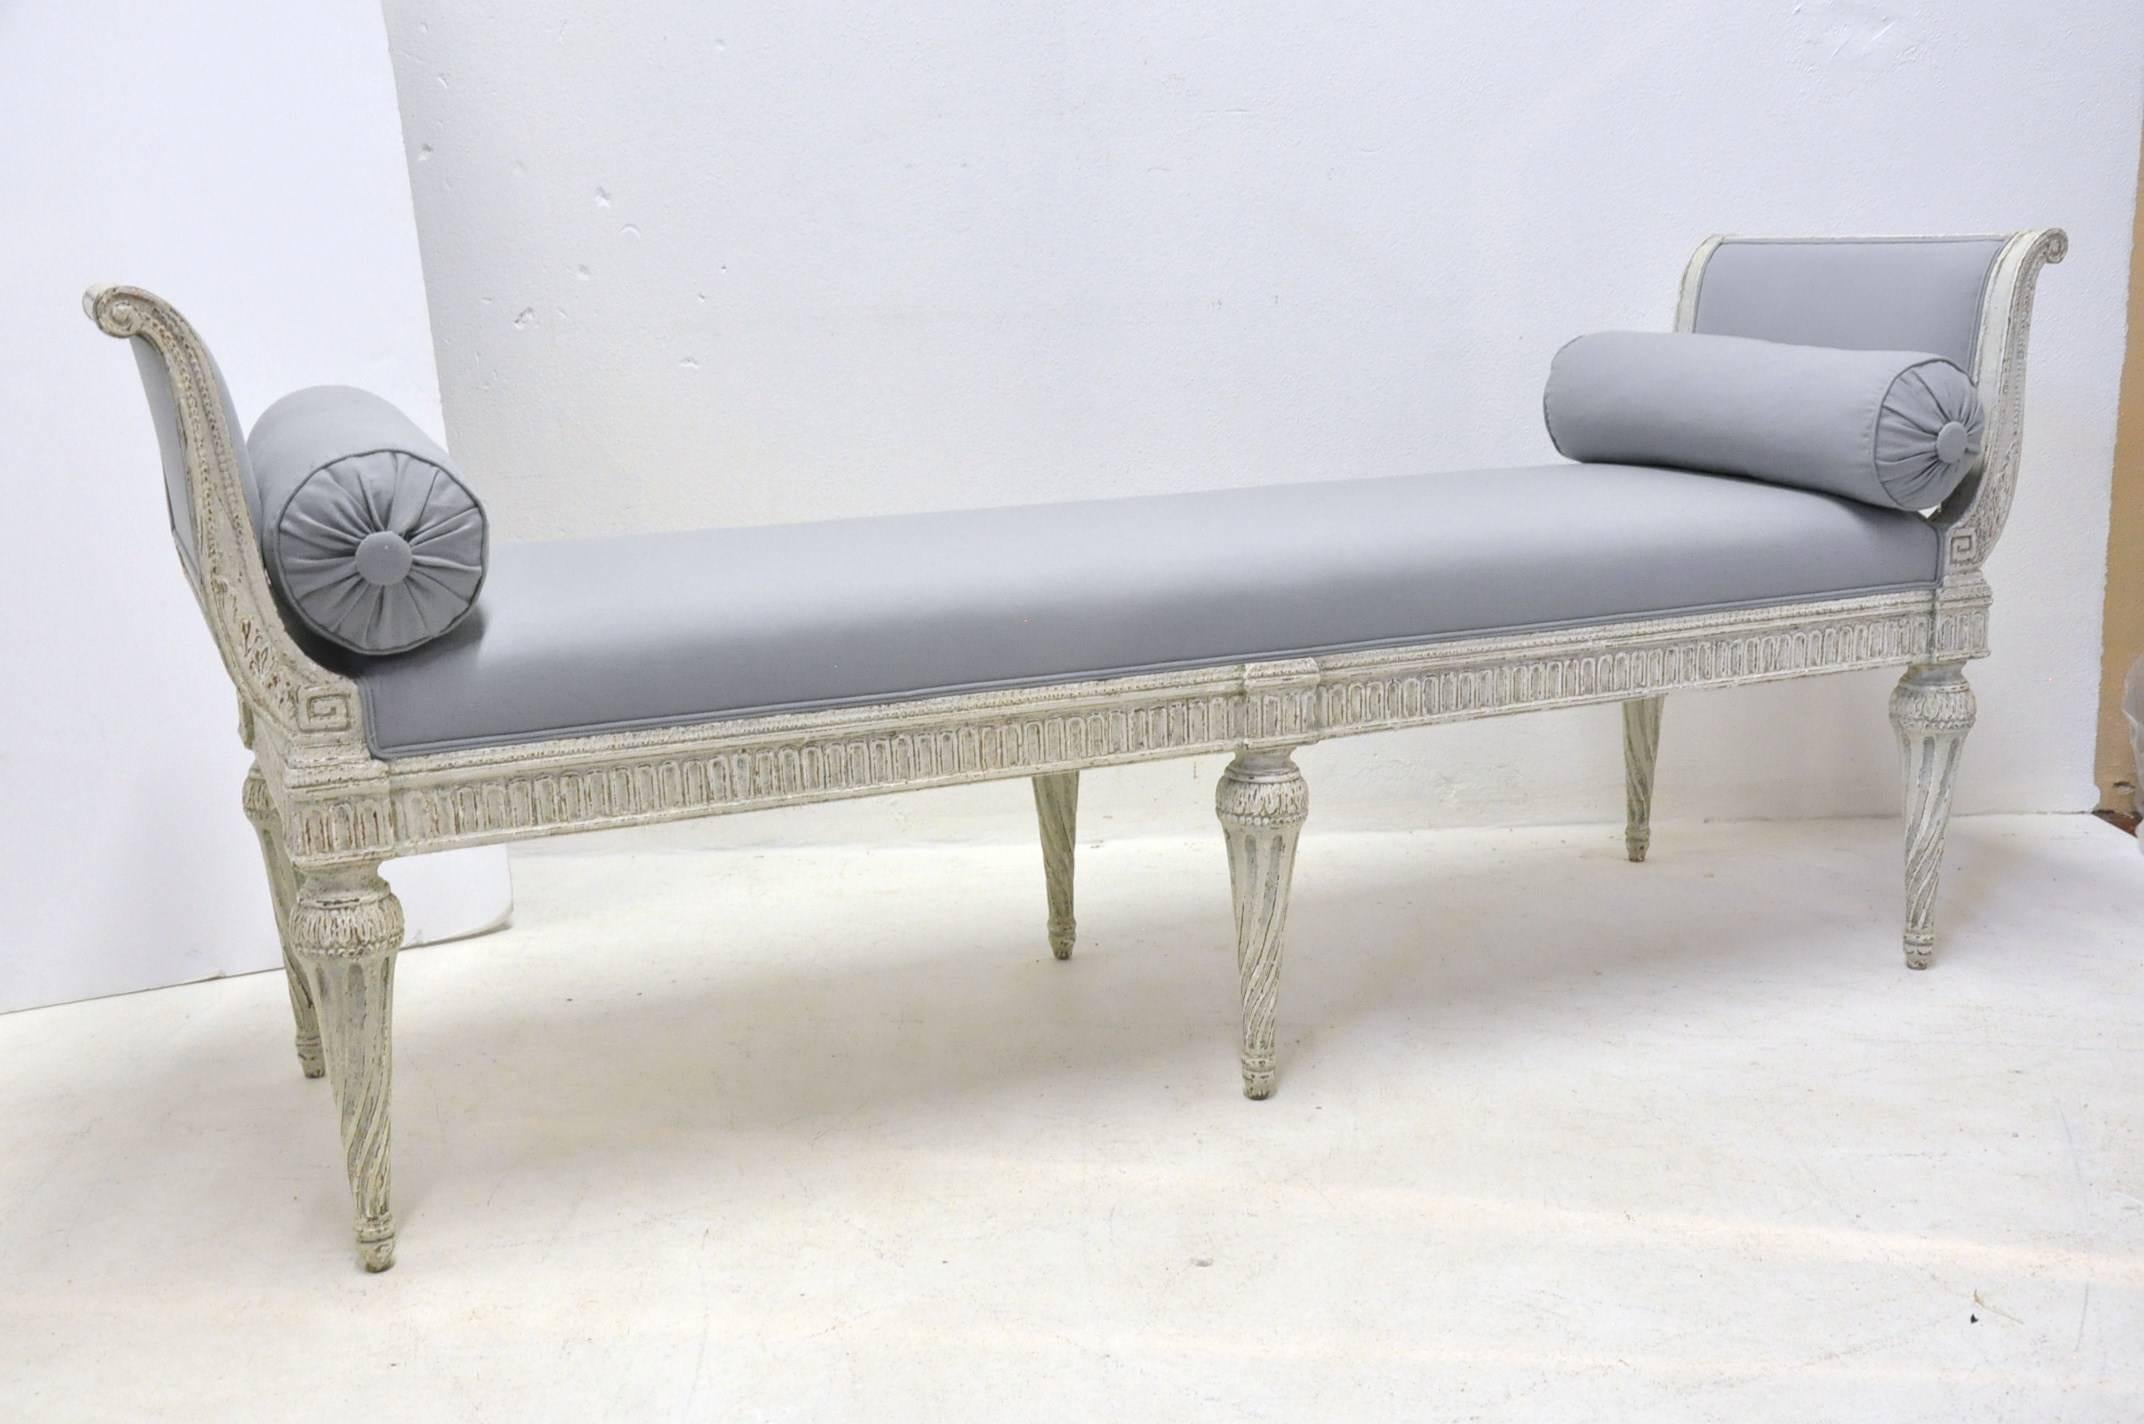 19th century painted Louis Philippe banquette-settee-bench (circa:1880). Reupholstered with grey fabric with matching pillows. A great addition at the foot of a king size bed!